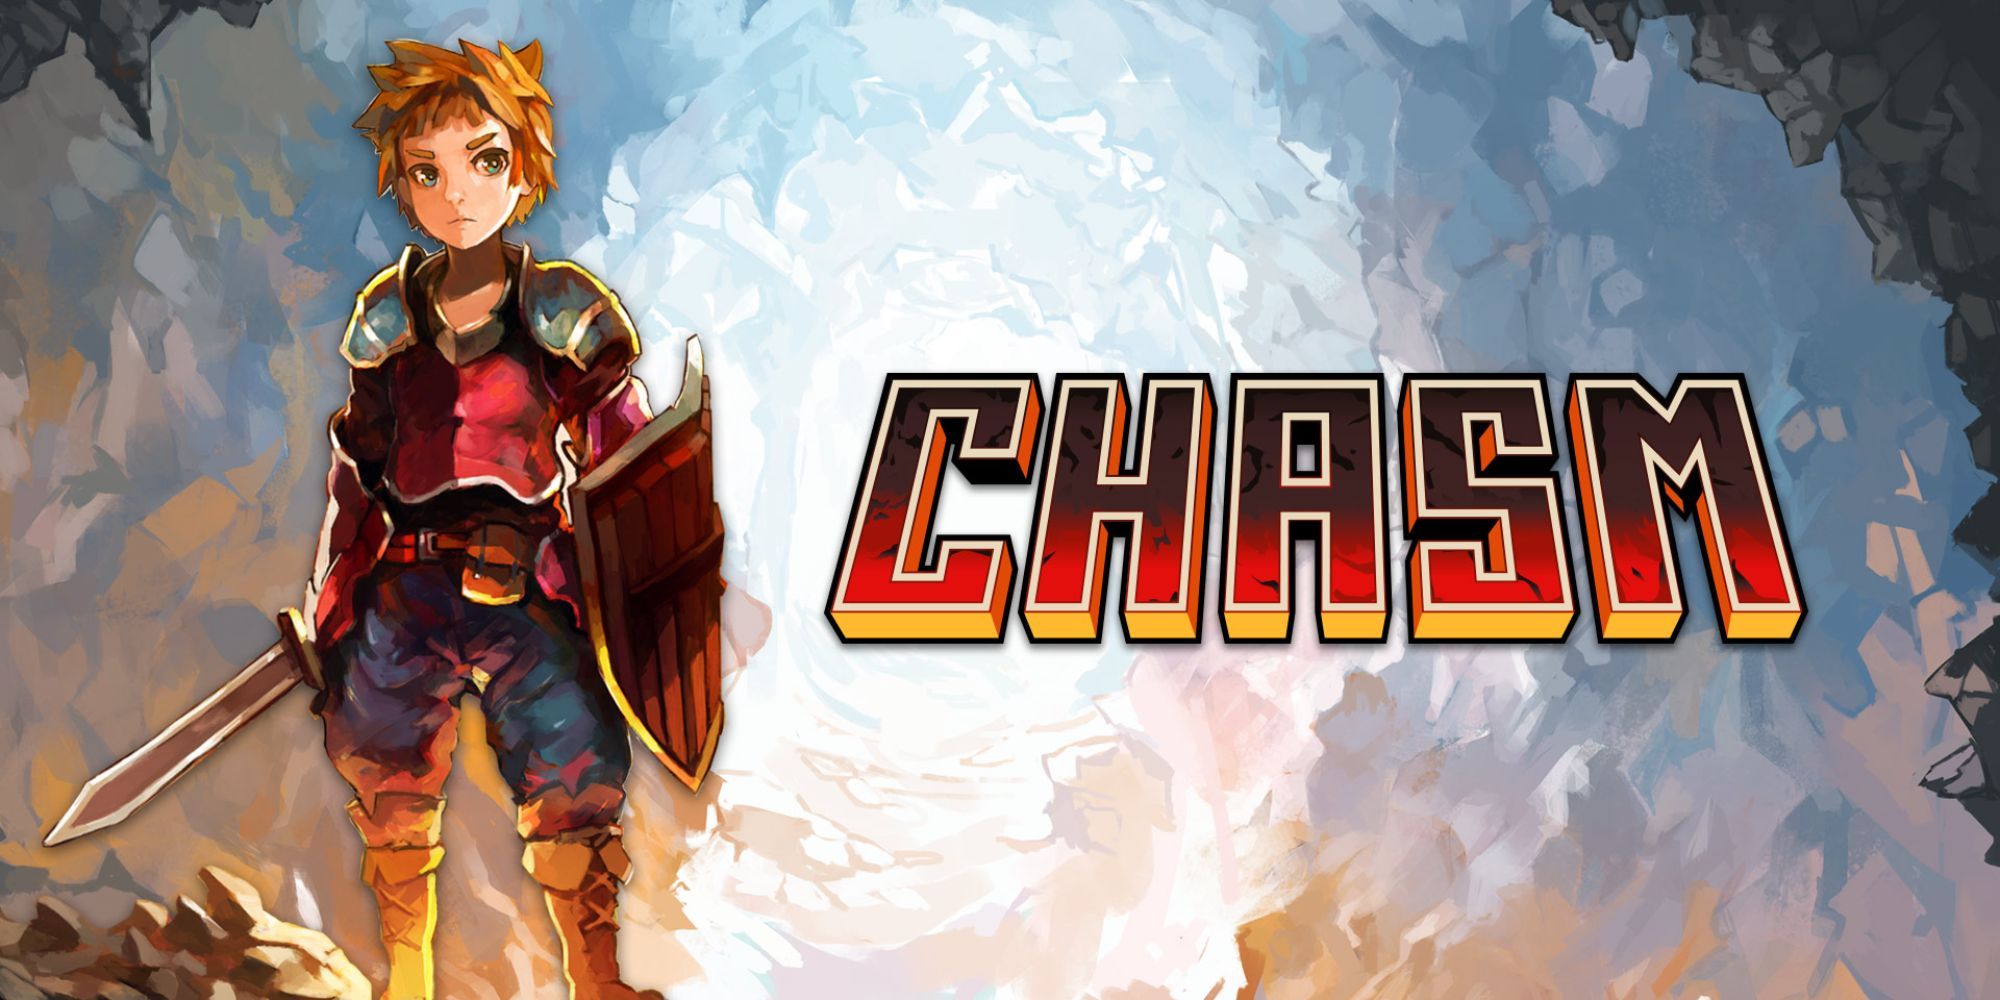 Chasm Title With Knight Stood Armed